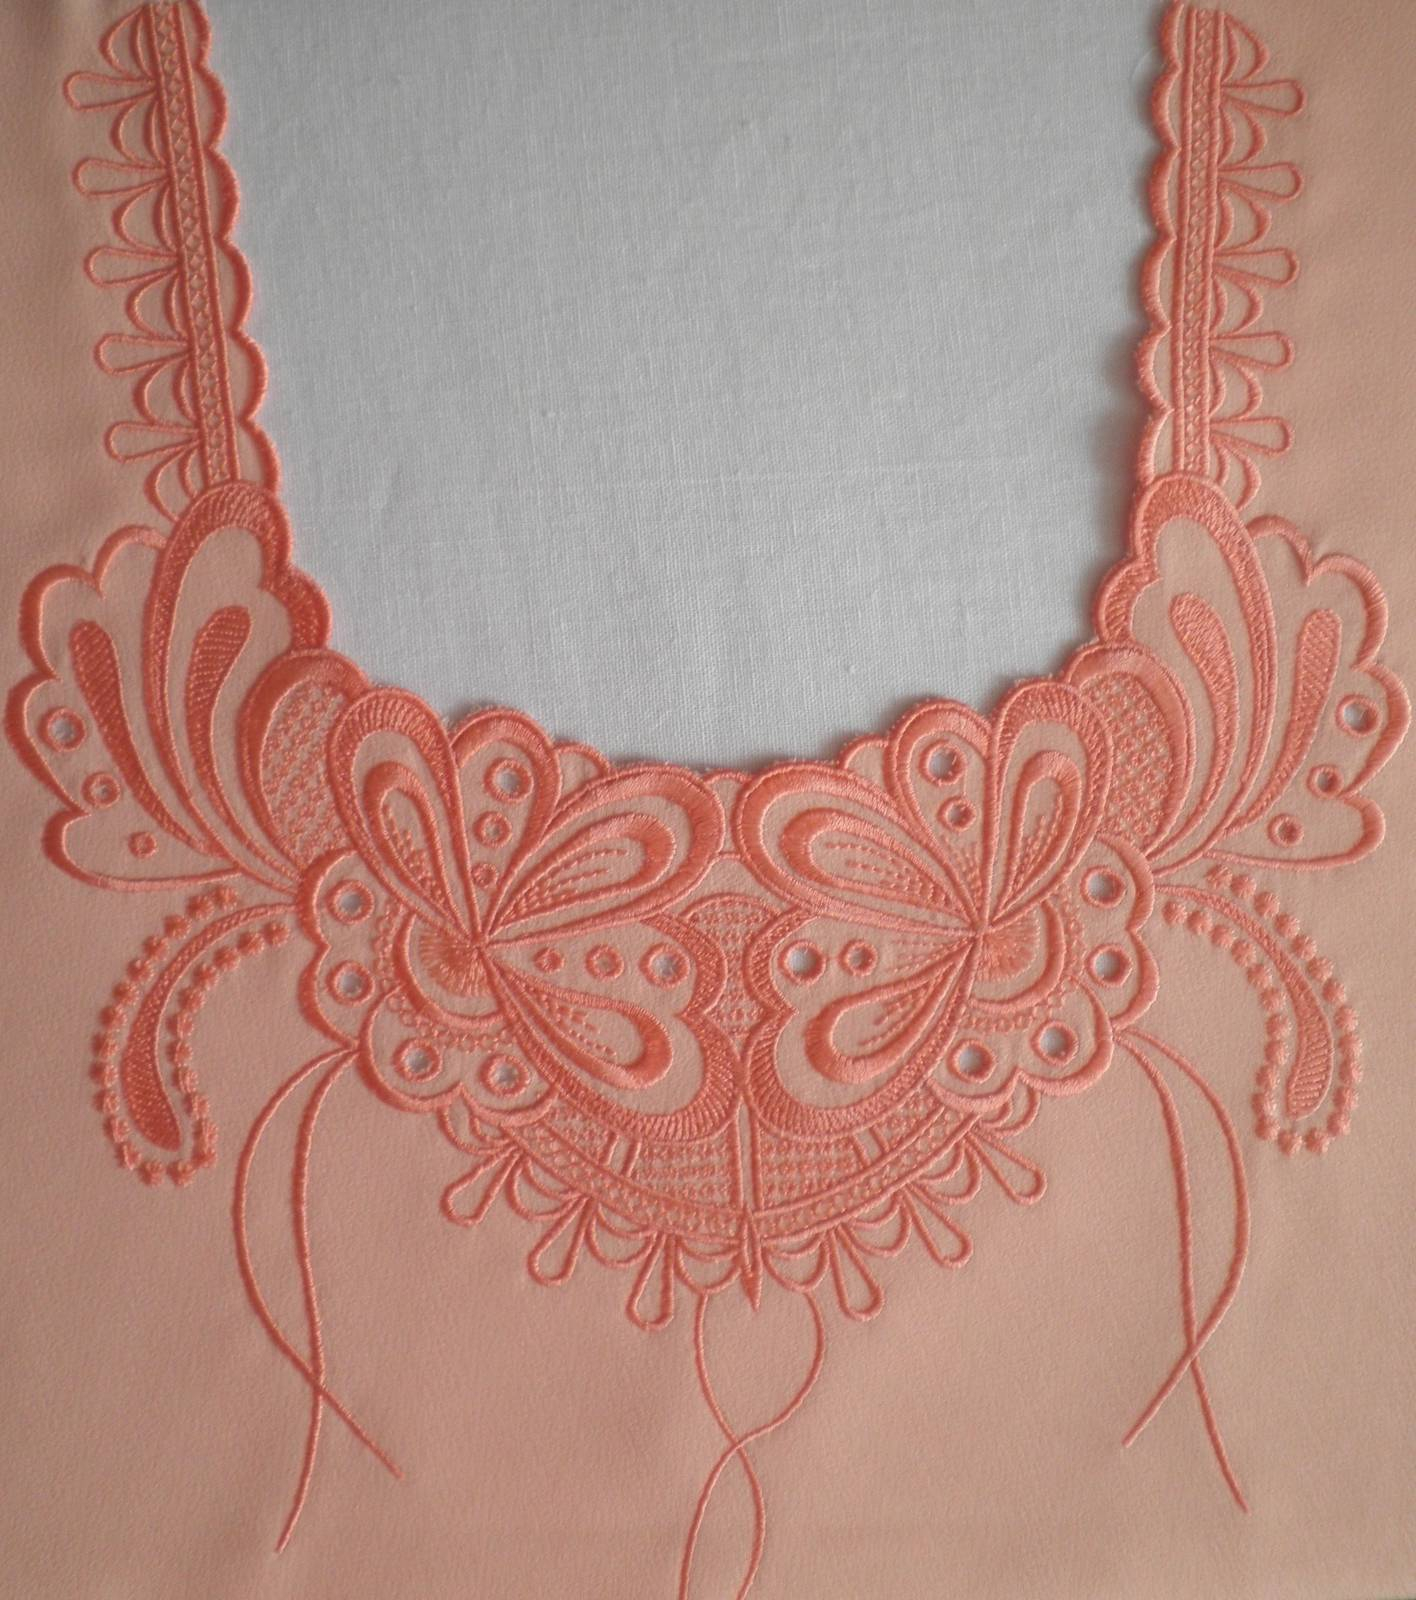 Machine Embroidery Lace Patterns Collar Lace Free Machine Embroidery Design 12 Free Embroidery